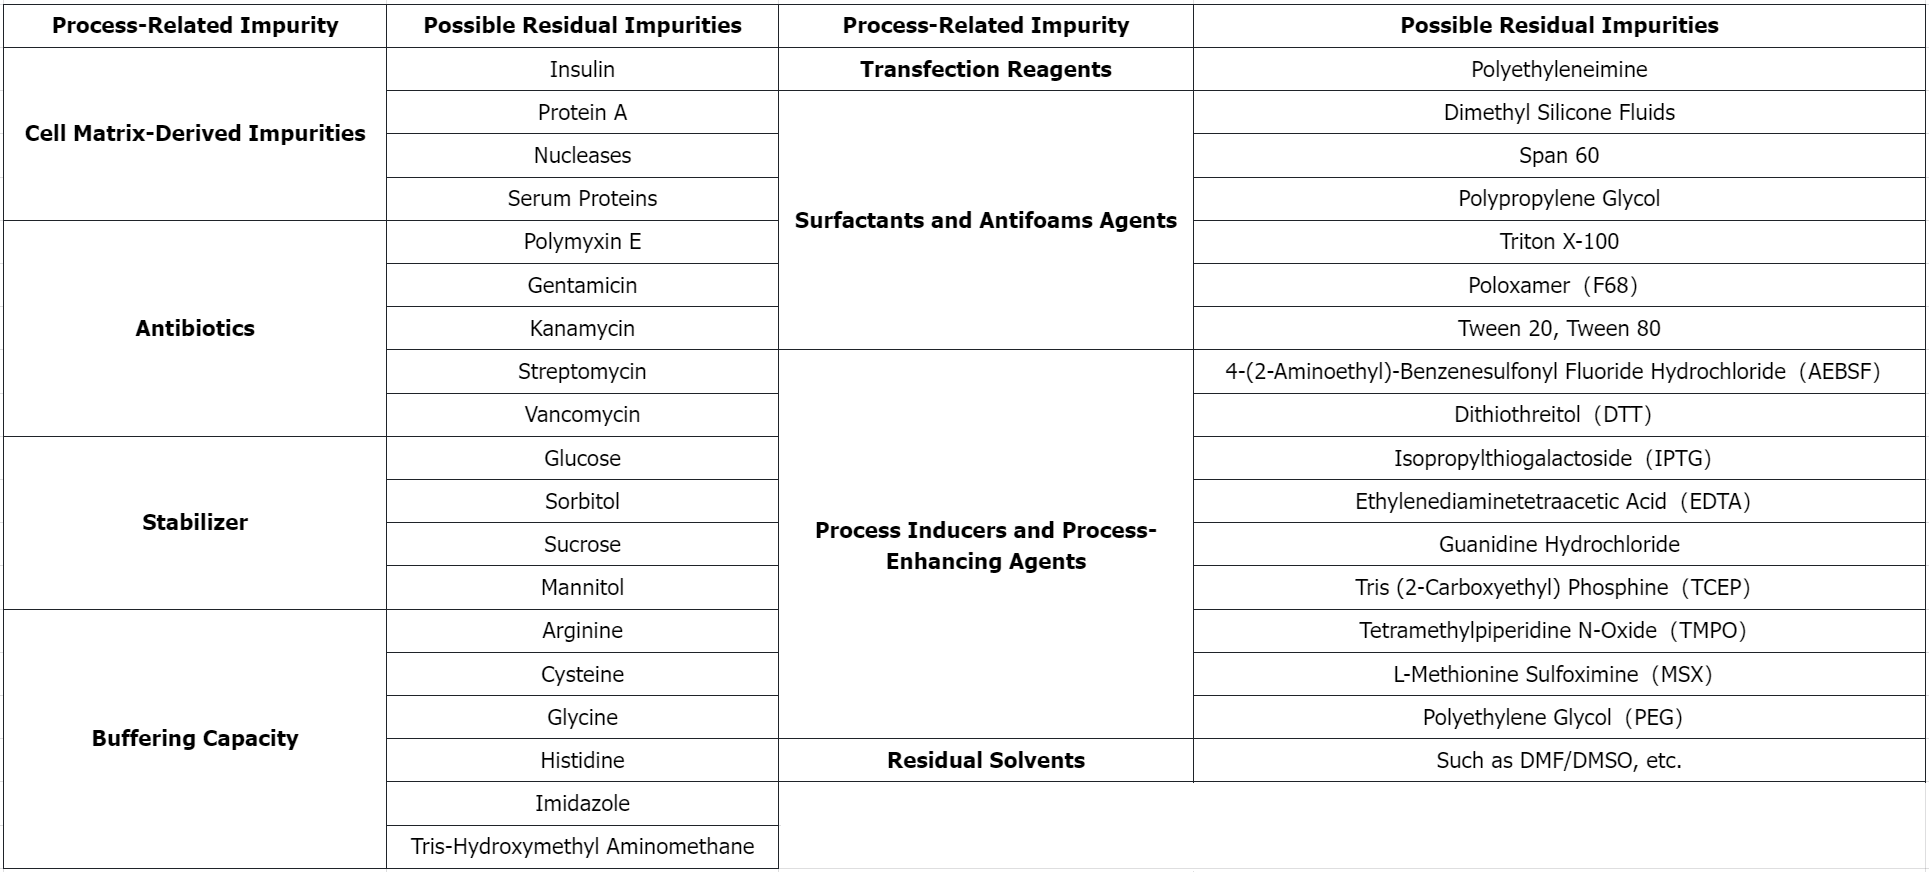 1797920891219263488-analysis-of-process-related-impurities.png